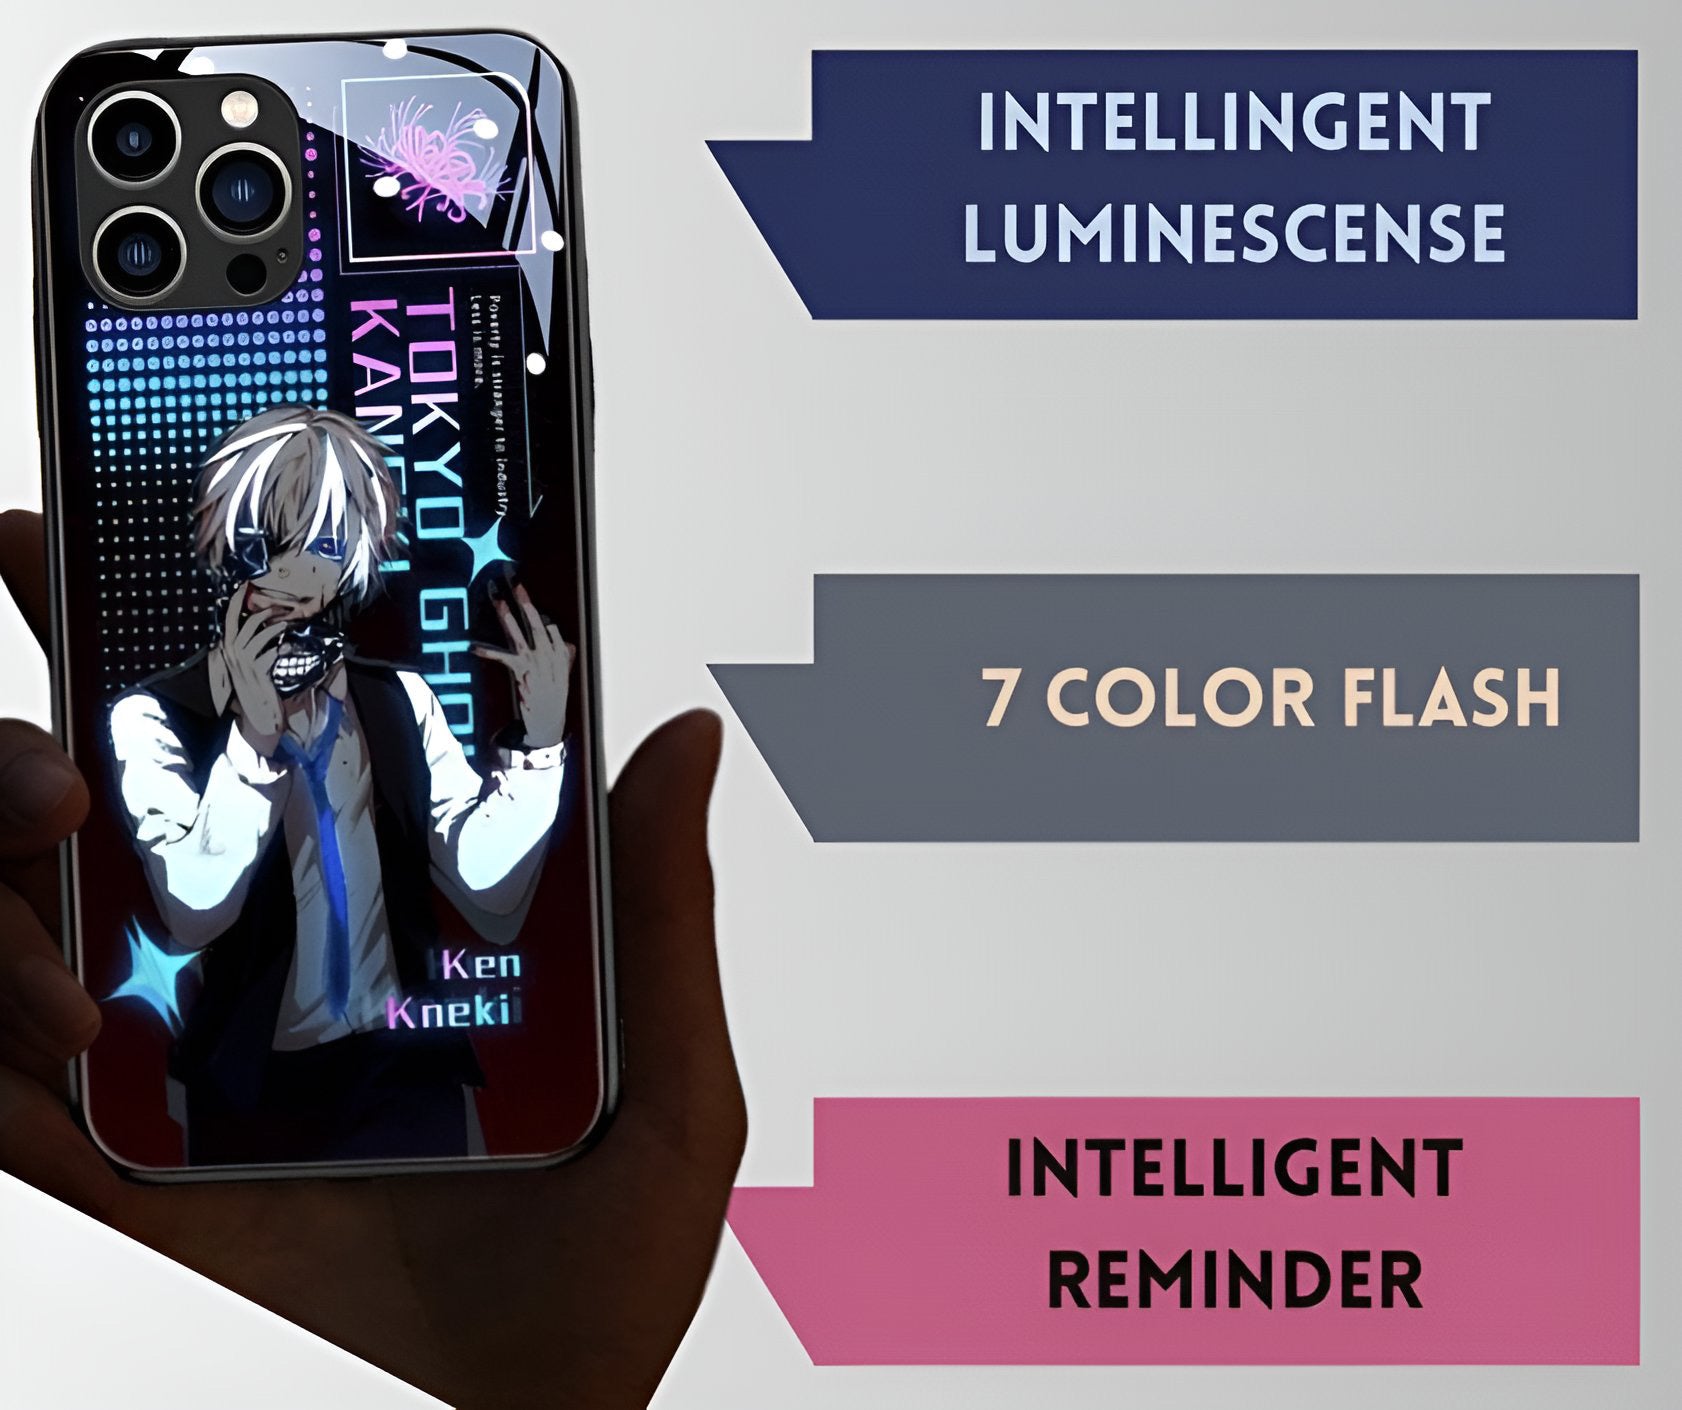 Luxury Light Led Case - Tokyo Ghoul Edition - more cases inside